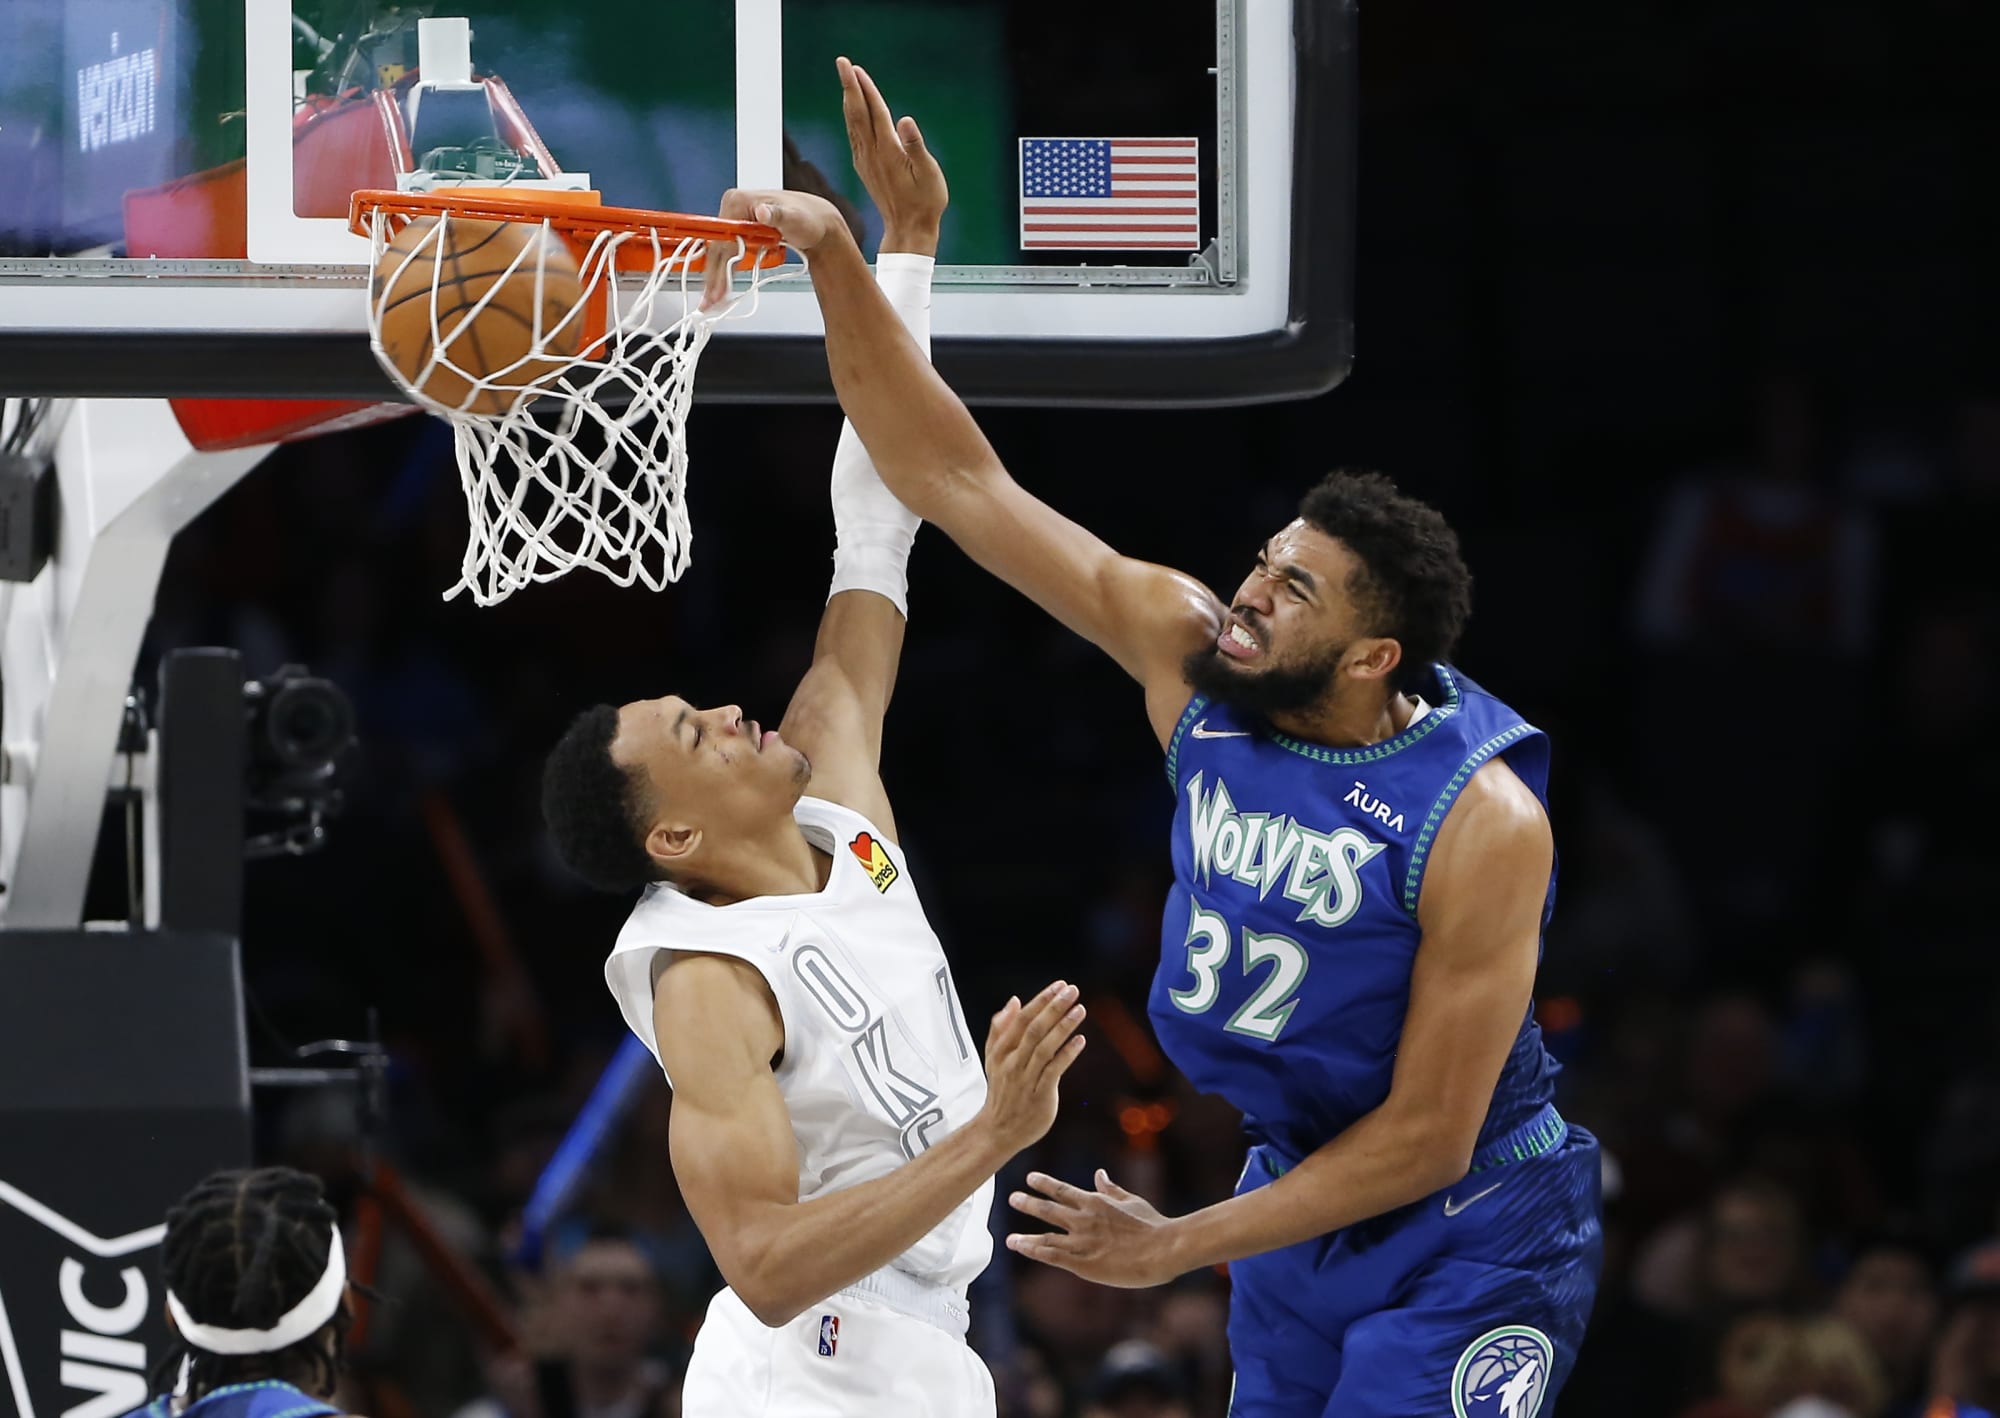 NBA Playoffs: Watch Karl-Anthony Towns' Poster Dunk in Win Over